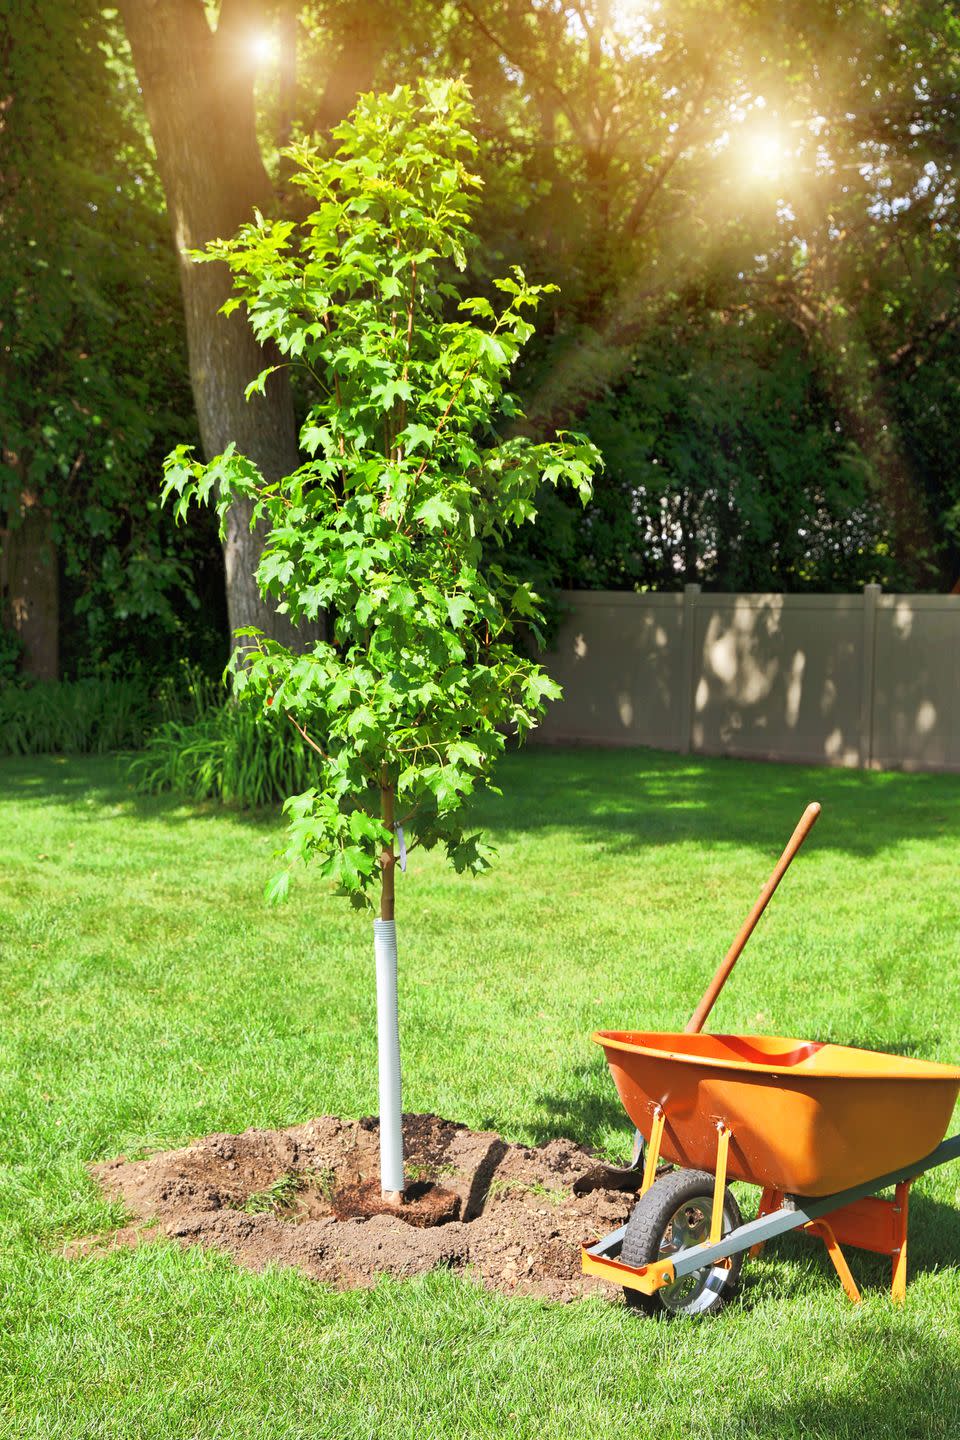 <p>Autumn is a great time to plant any tree because it’s less stressful to the plant as it tries to get established. While you’re at it, opt for a tree that has gorgeous autumn colors, such as sugar maple, red maple, dogwood, or redbud.</p><p><a class="link " href="https://go.redirectingat.com?id=74968X1596630&url=https%3A%2F%2Fwww.fast-growing-trees.com%2Fproducts%2Fsugar-maple-tree&sref=https%3A%2F%2Fwww.thepioneerwoman.com%2Fhome-lifestyle%2Fgardening%2Fg41124596%2Ffall-landscape-ideas%2F" rel="nofollow noopener" target="_blank" data-ylk="slk:SHOP SUGAR MAPLES">SHOP SUGAR MAPLES</a></p>